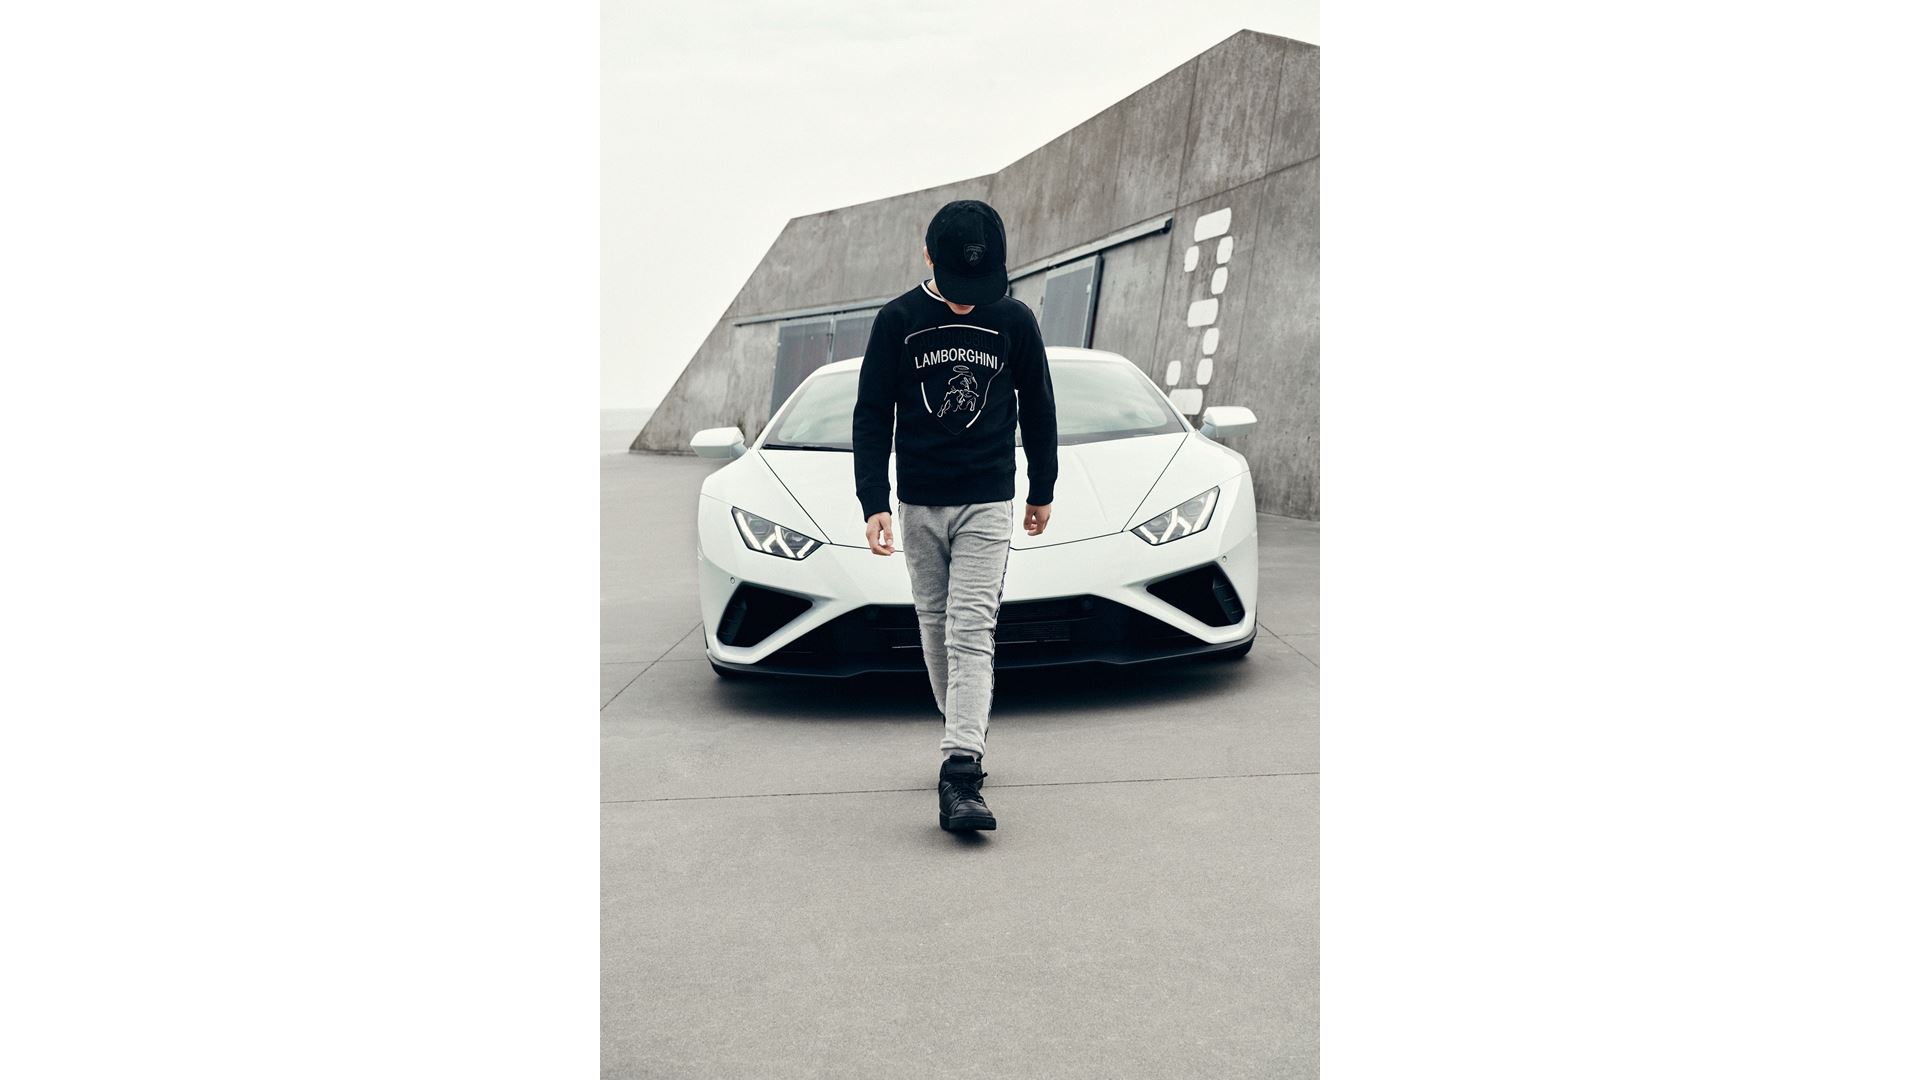 Automobili Lamborghini at Pitti Immagine Uomo e Bambino - The Kidswear Fall-Winter 2022-23 collection and the new Special Edition with 24Bottles on display - Image 3